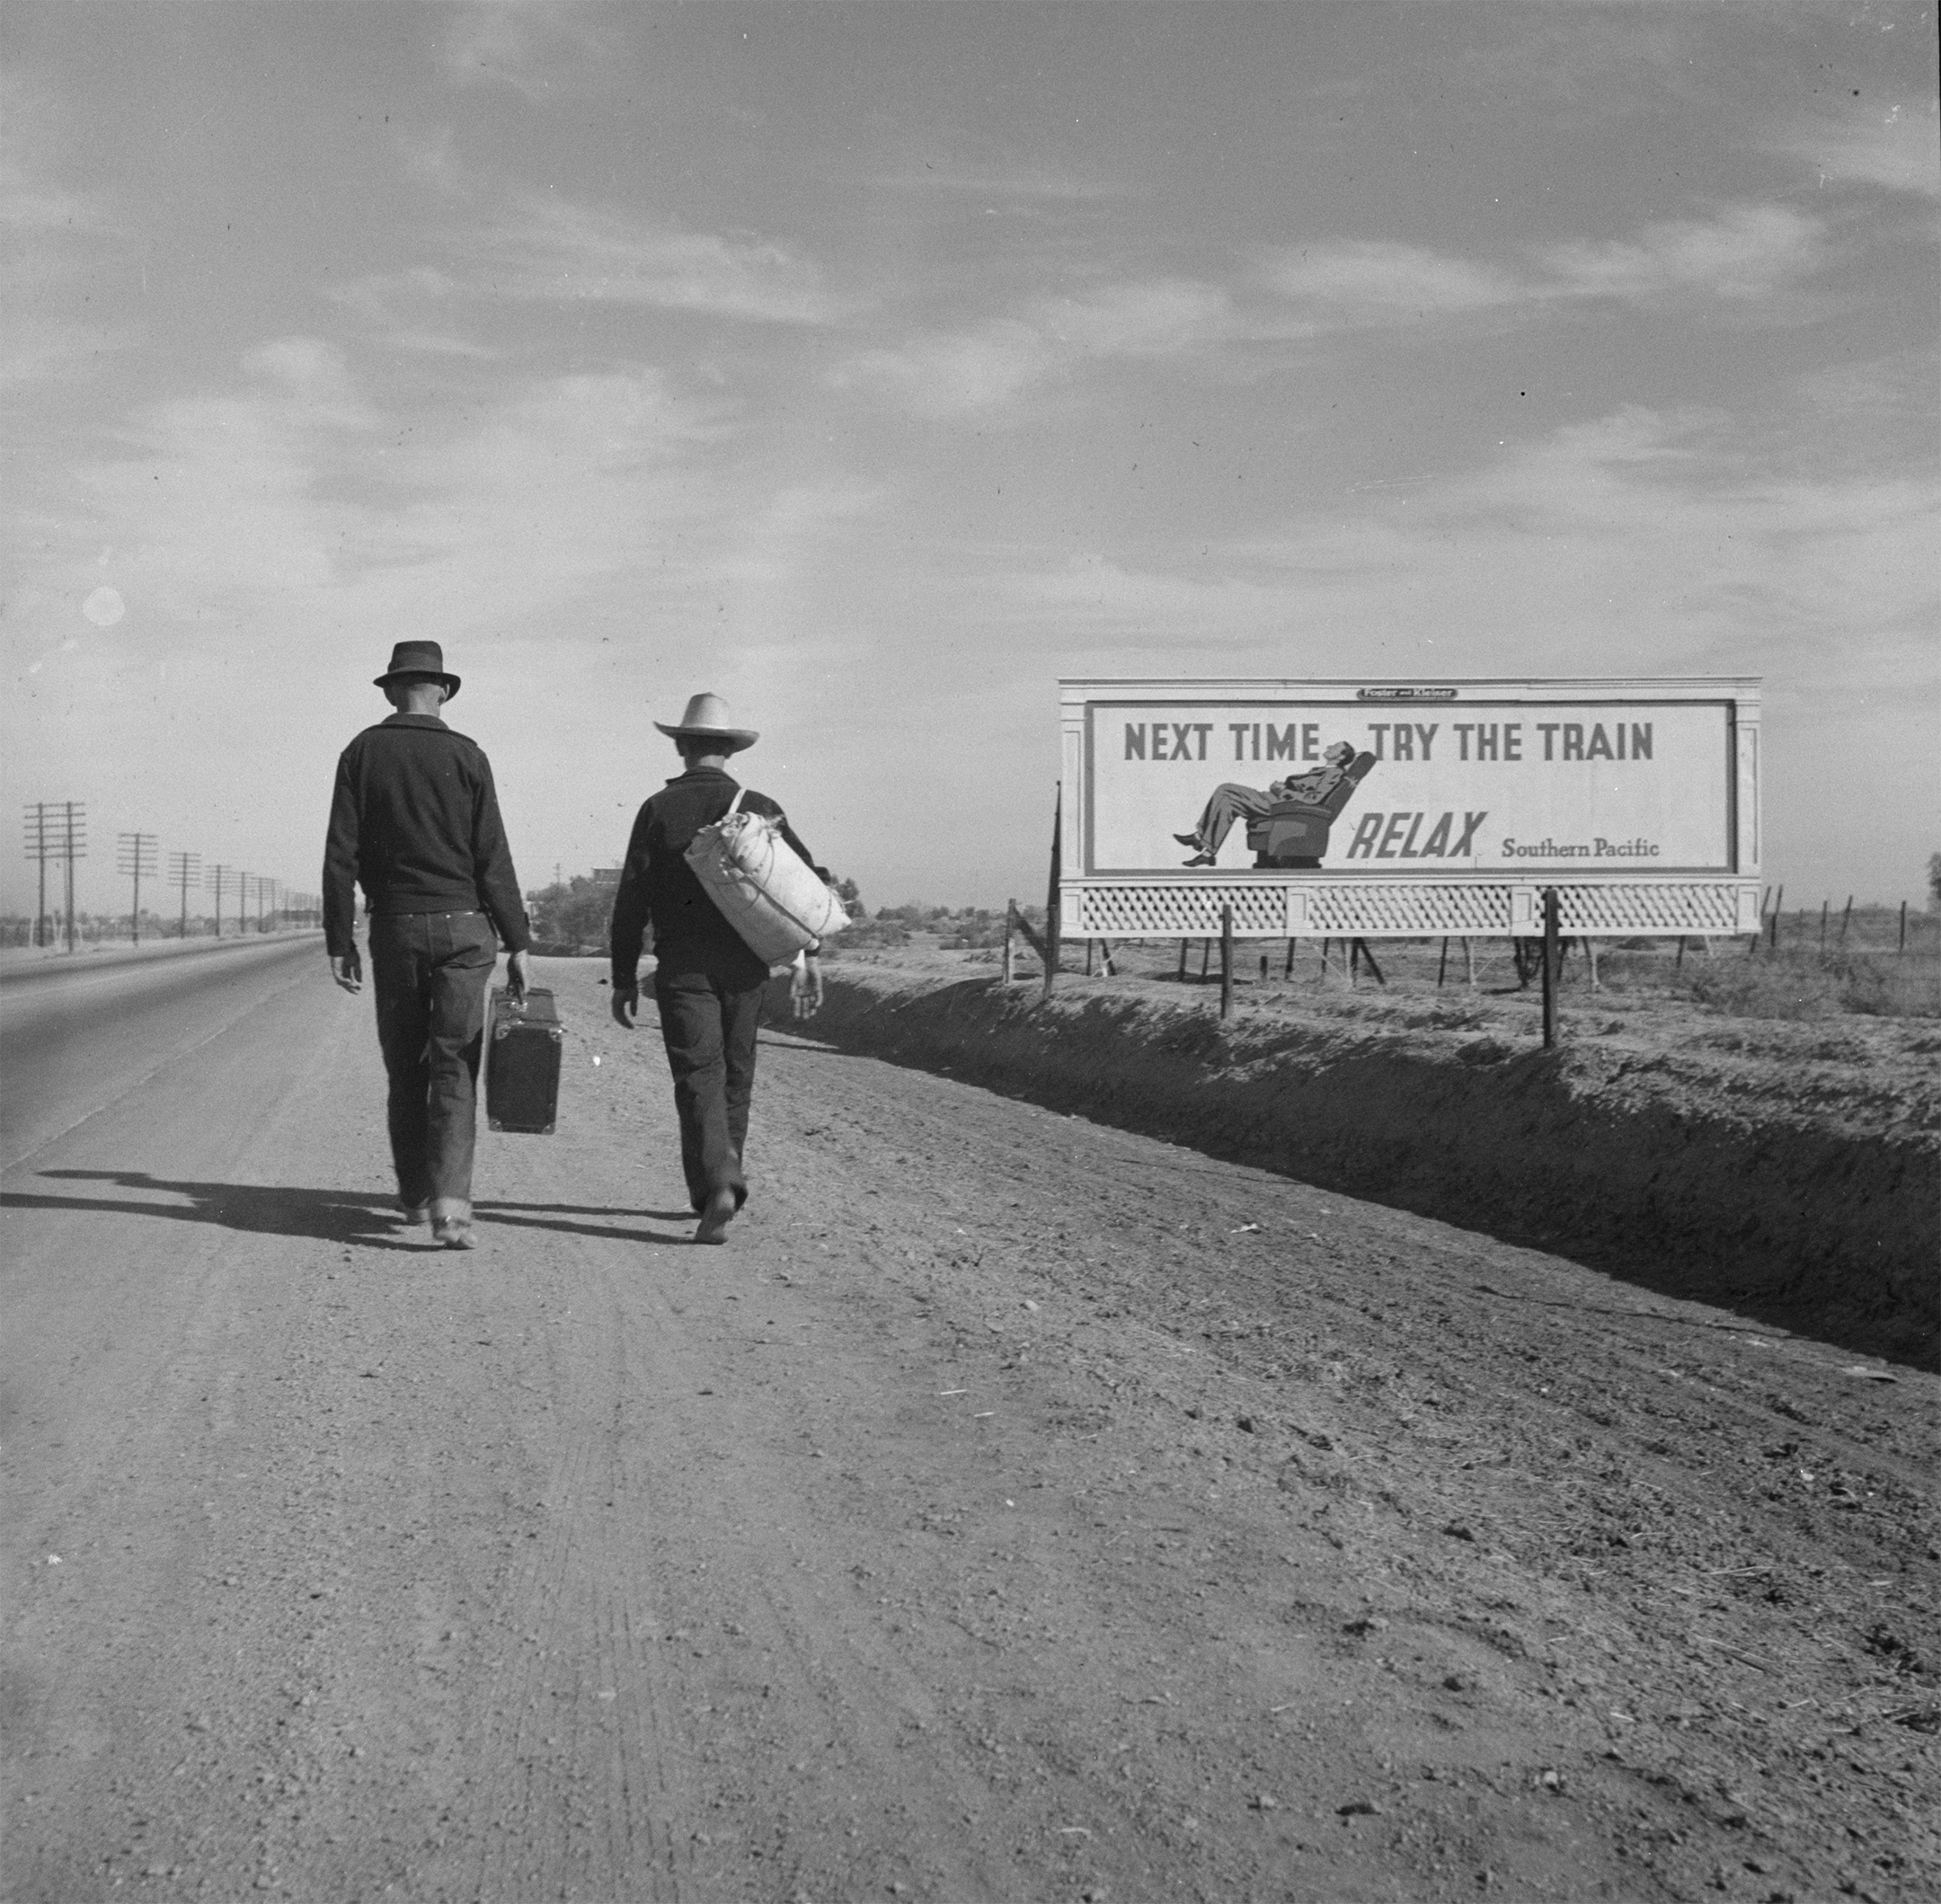 Black and white photo of two men, seen from behind, walking down a dusty road carrying bags and wearing cowboy hats, with a billboard to the right reading "next time try the train relax"